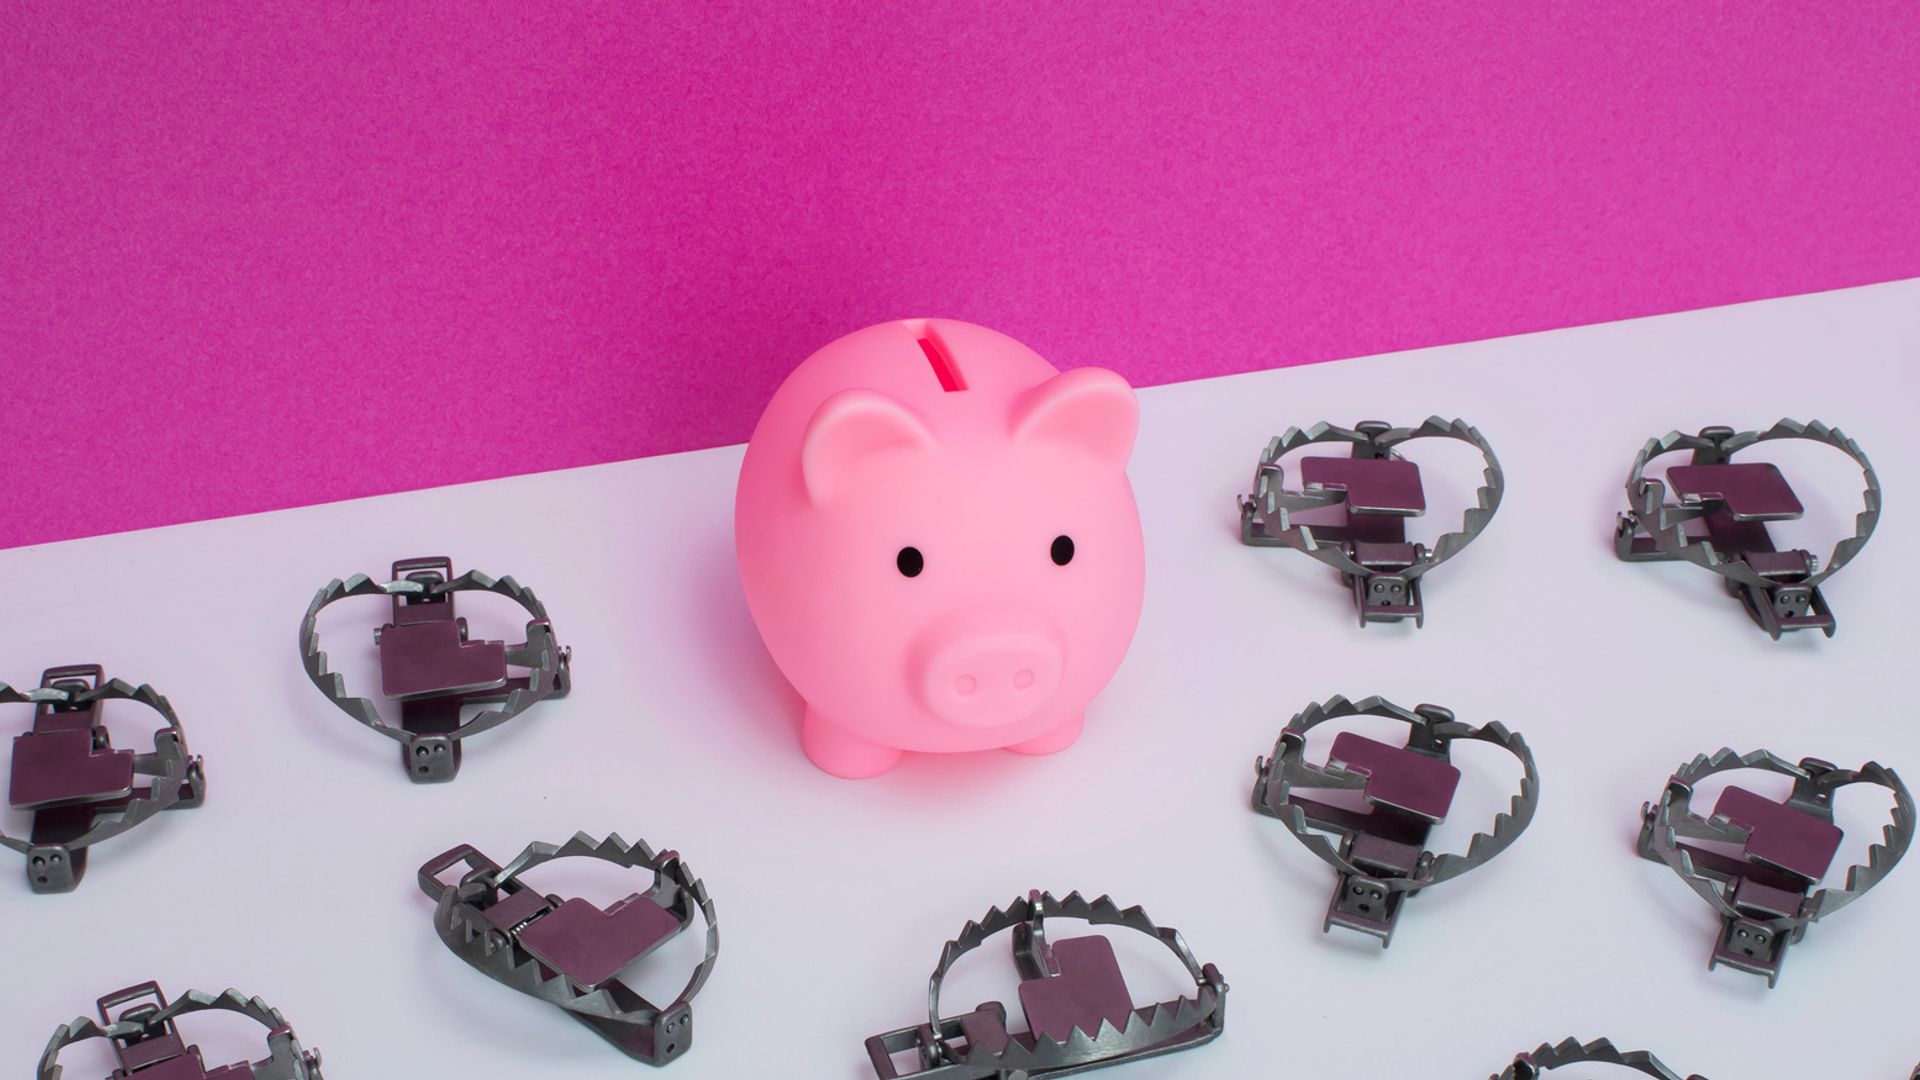 Little pink ceramic piggy bank surrounded by little bear traps on white surface, against pink wall